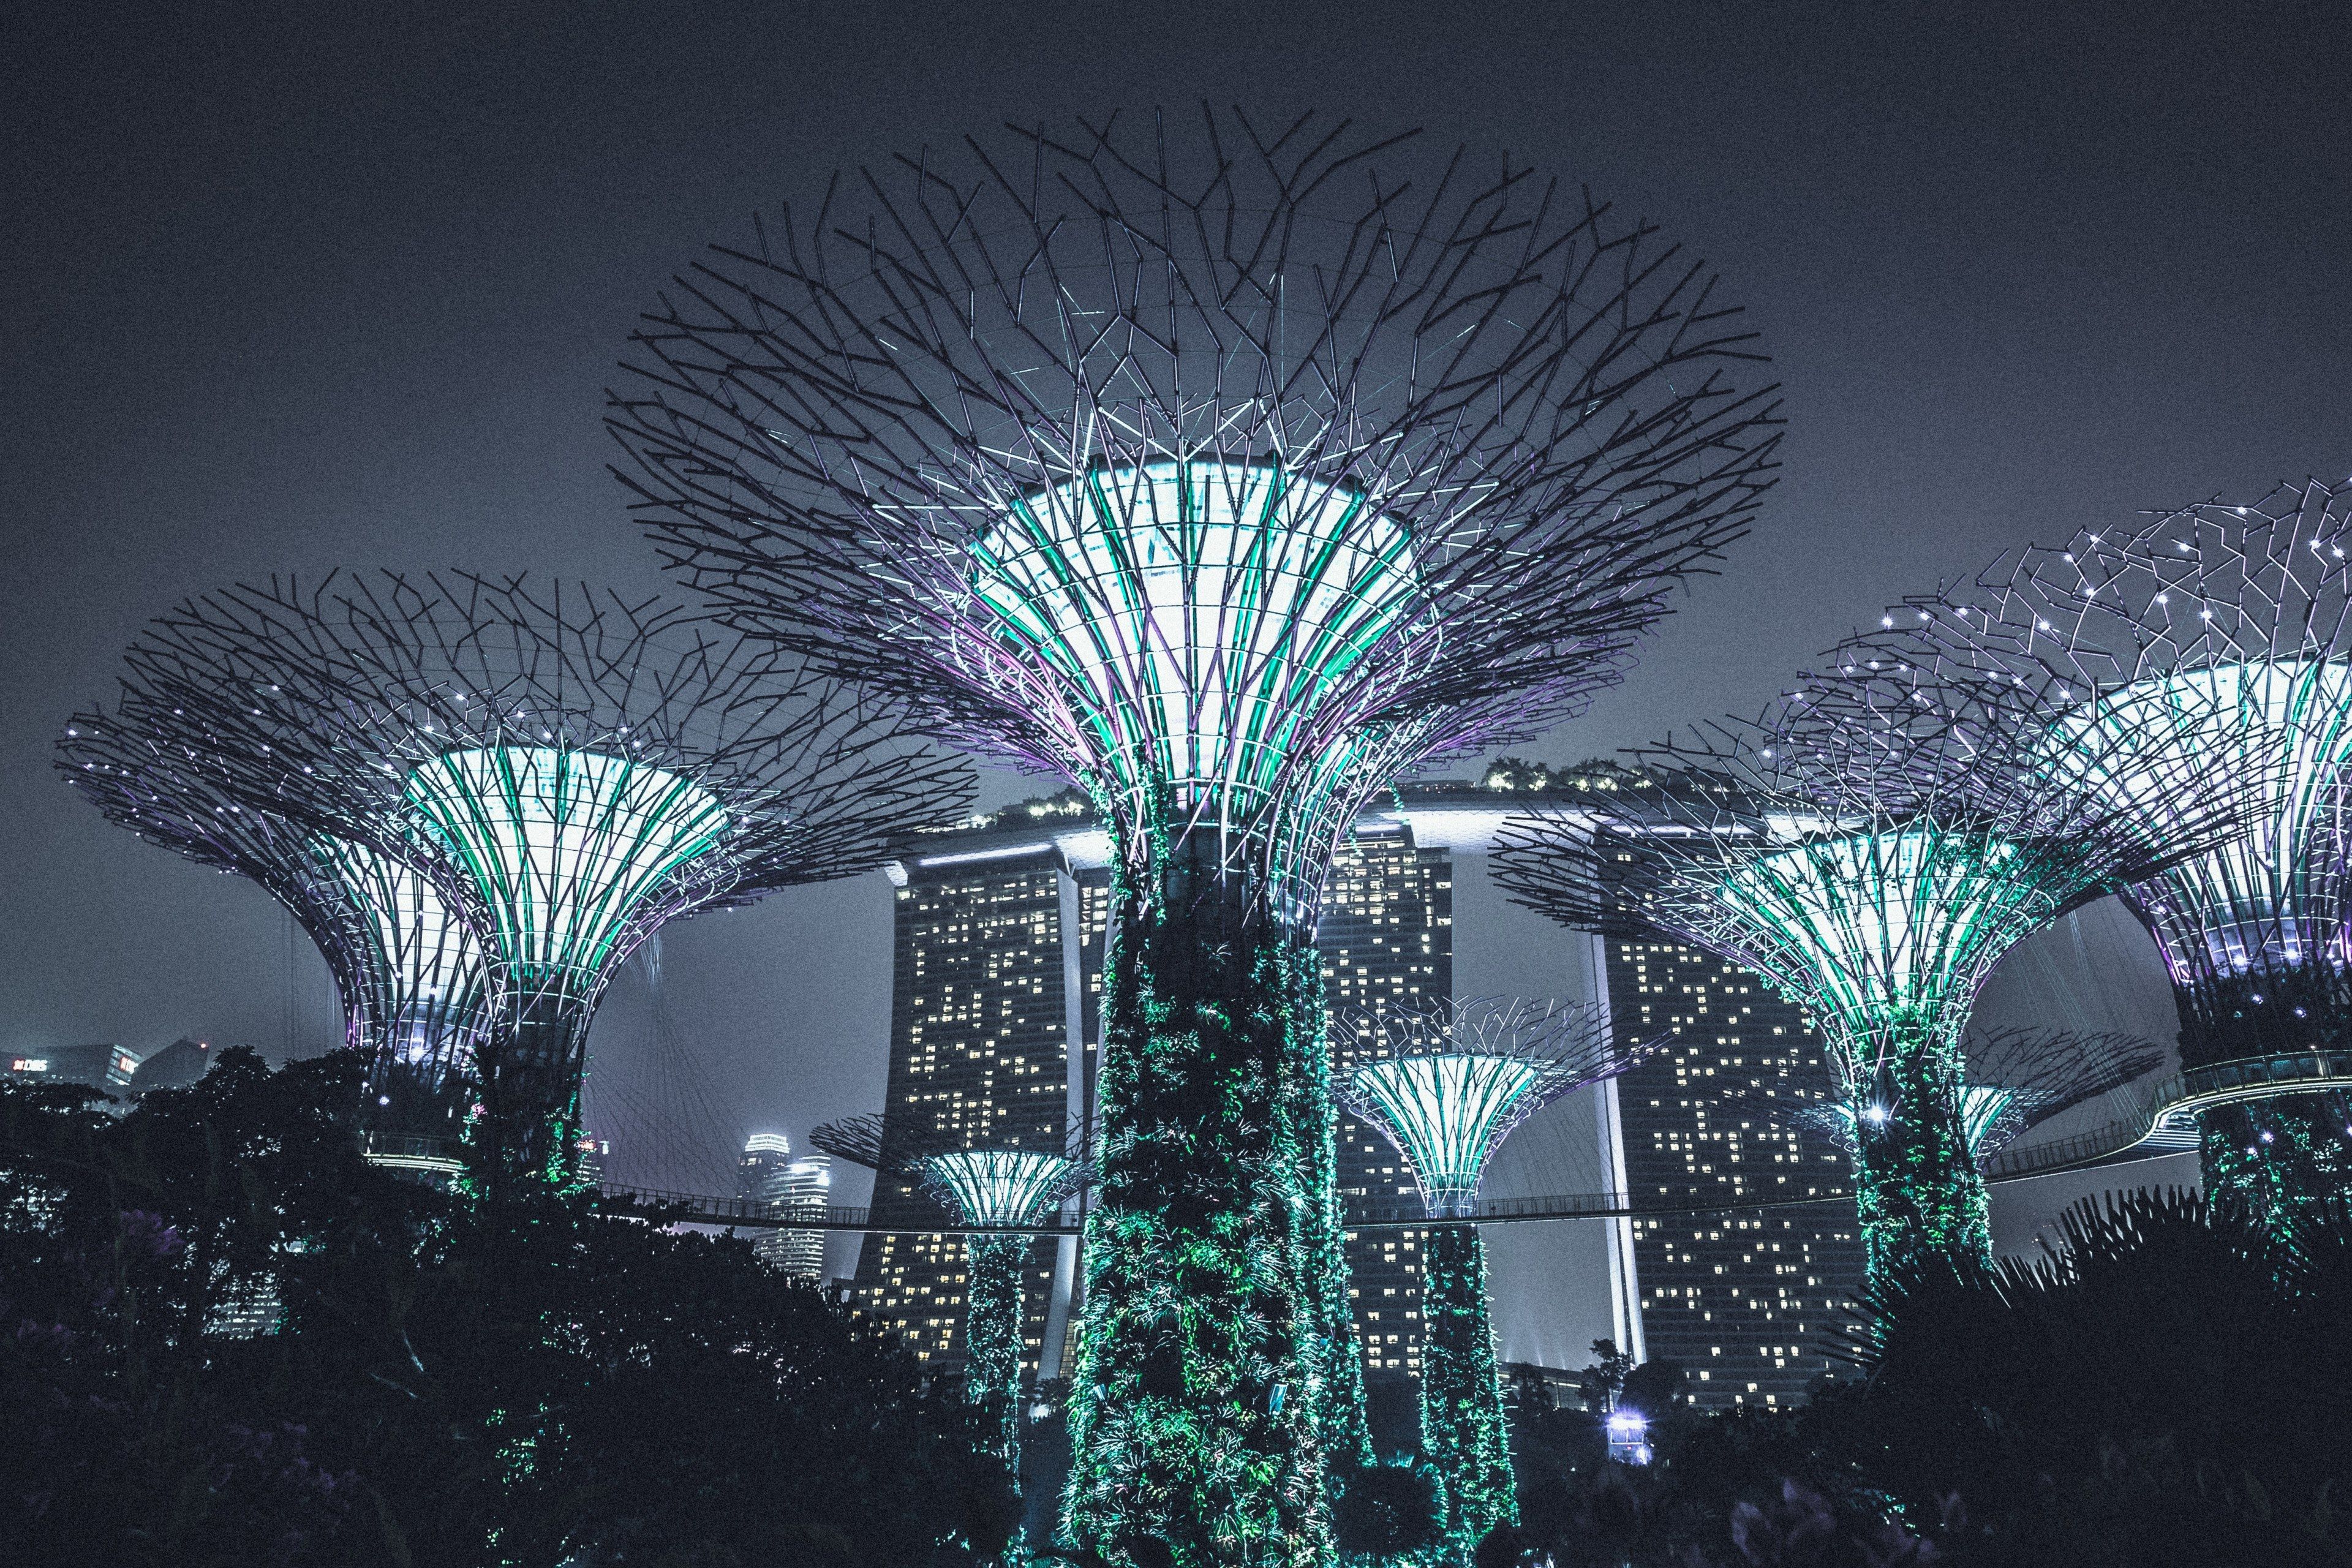 Wallpaper / light architecture gardens by the bay and supertree HD 4k wallpaper